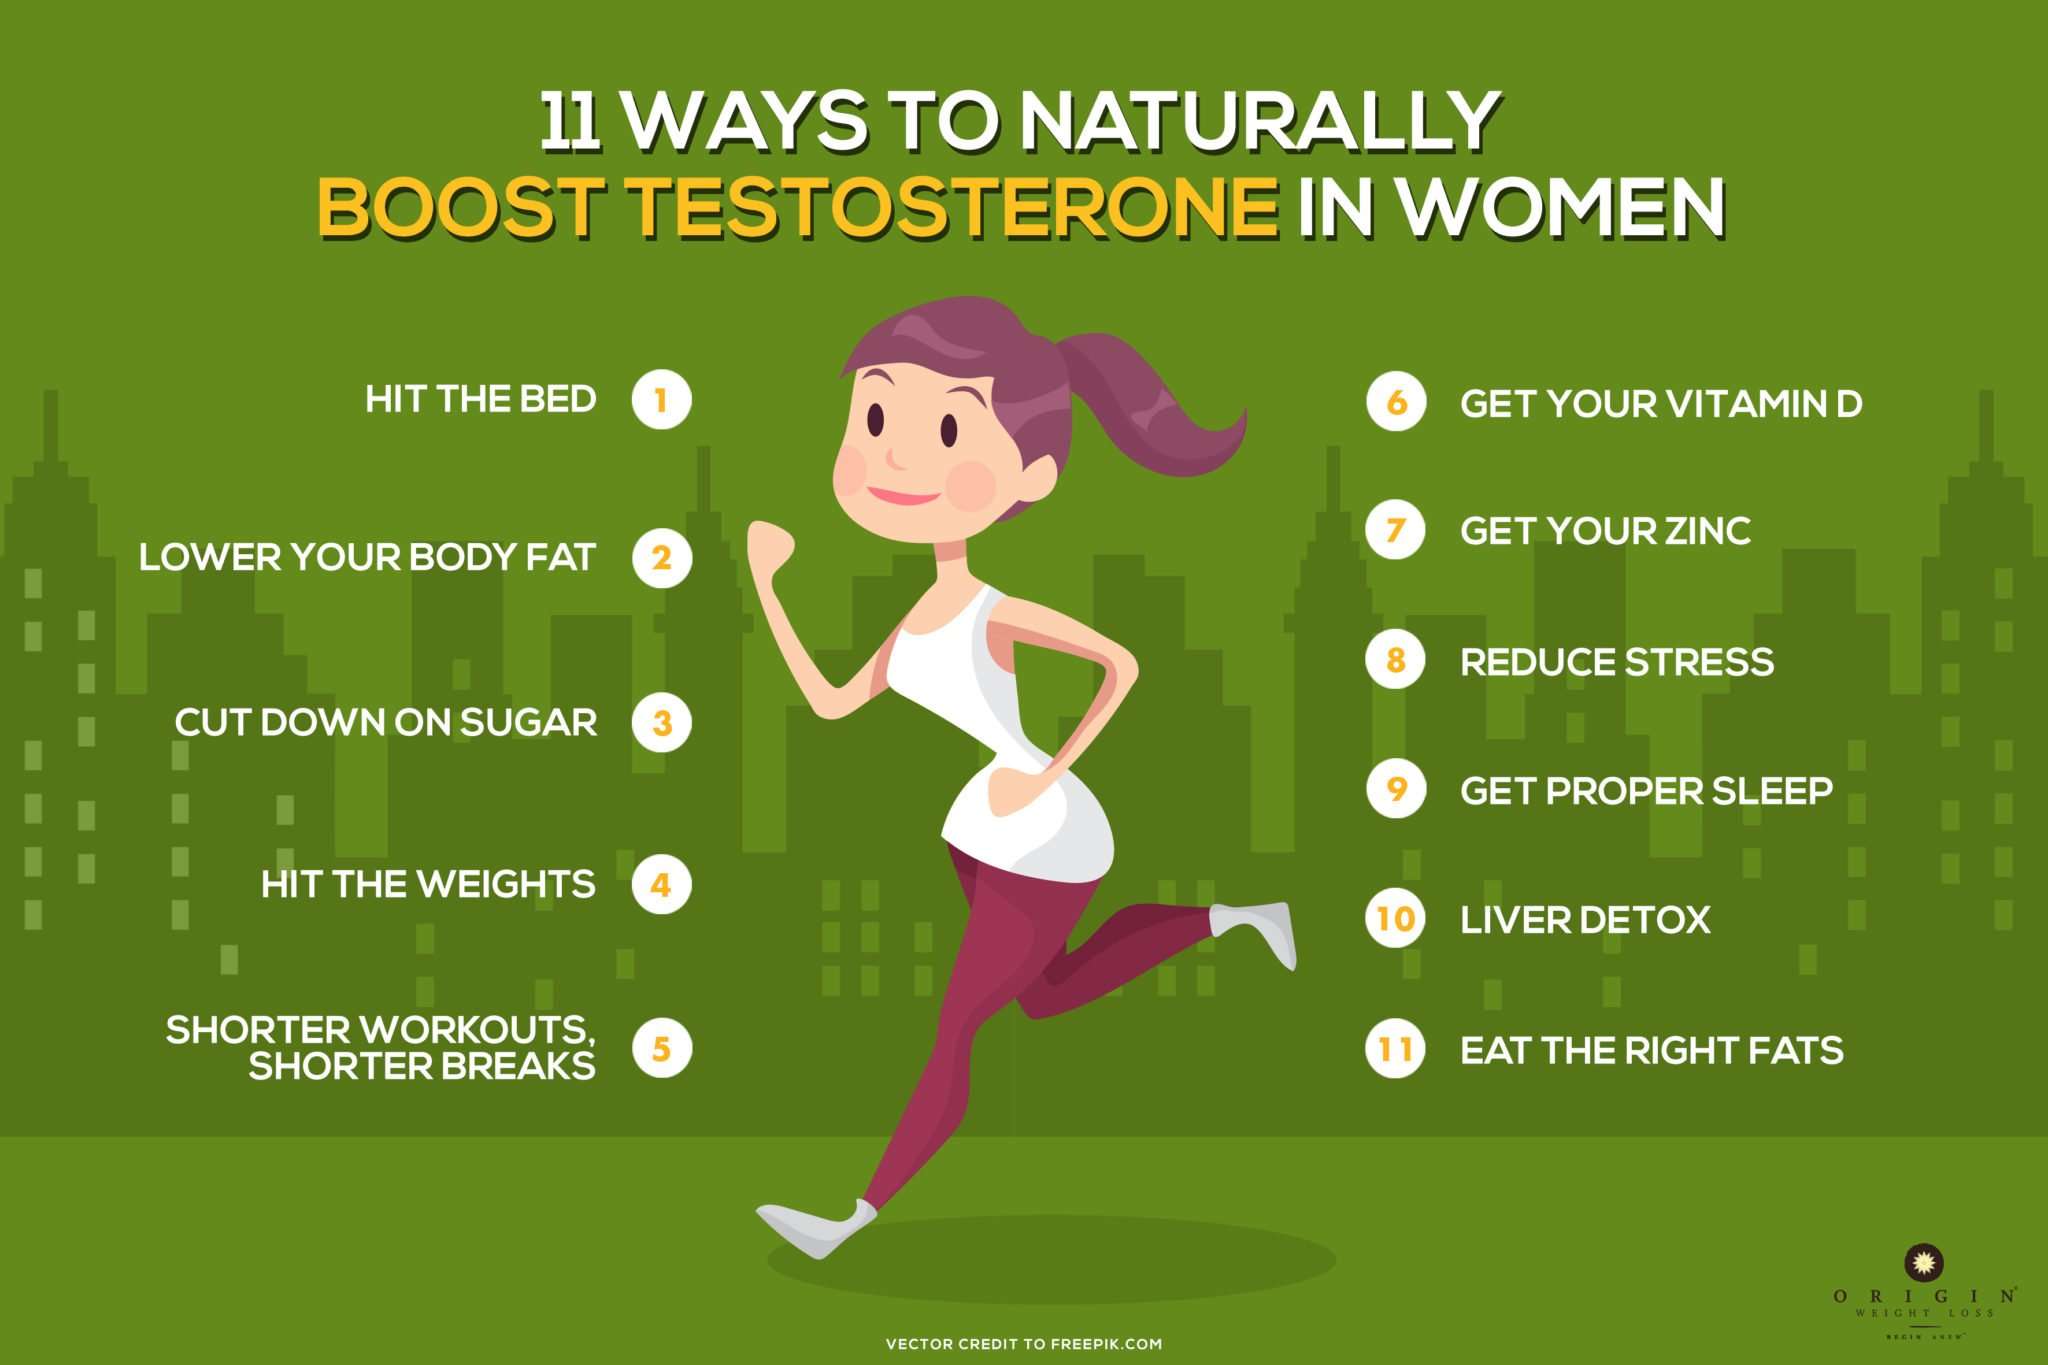 HOW TO BOOST TESTOSTERONE NATURALLY IN WOMEN